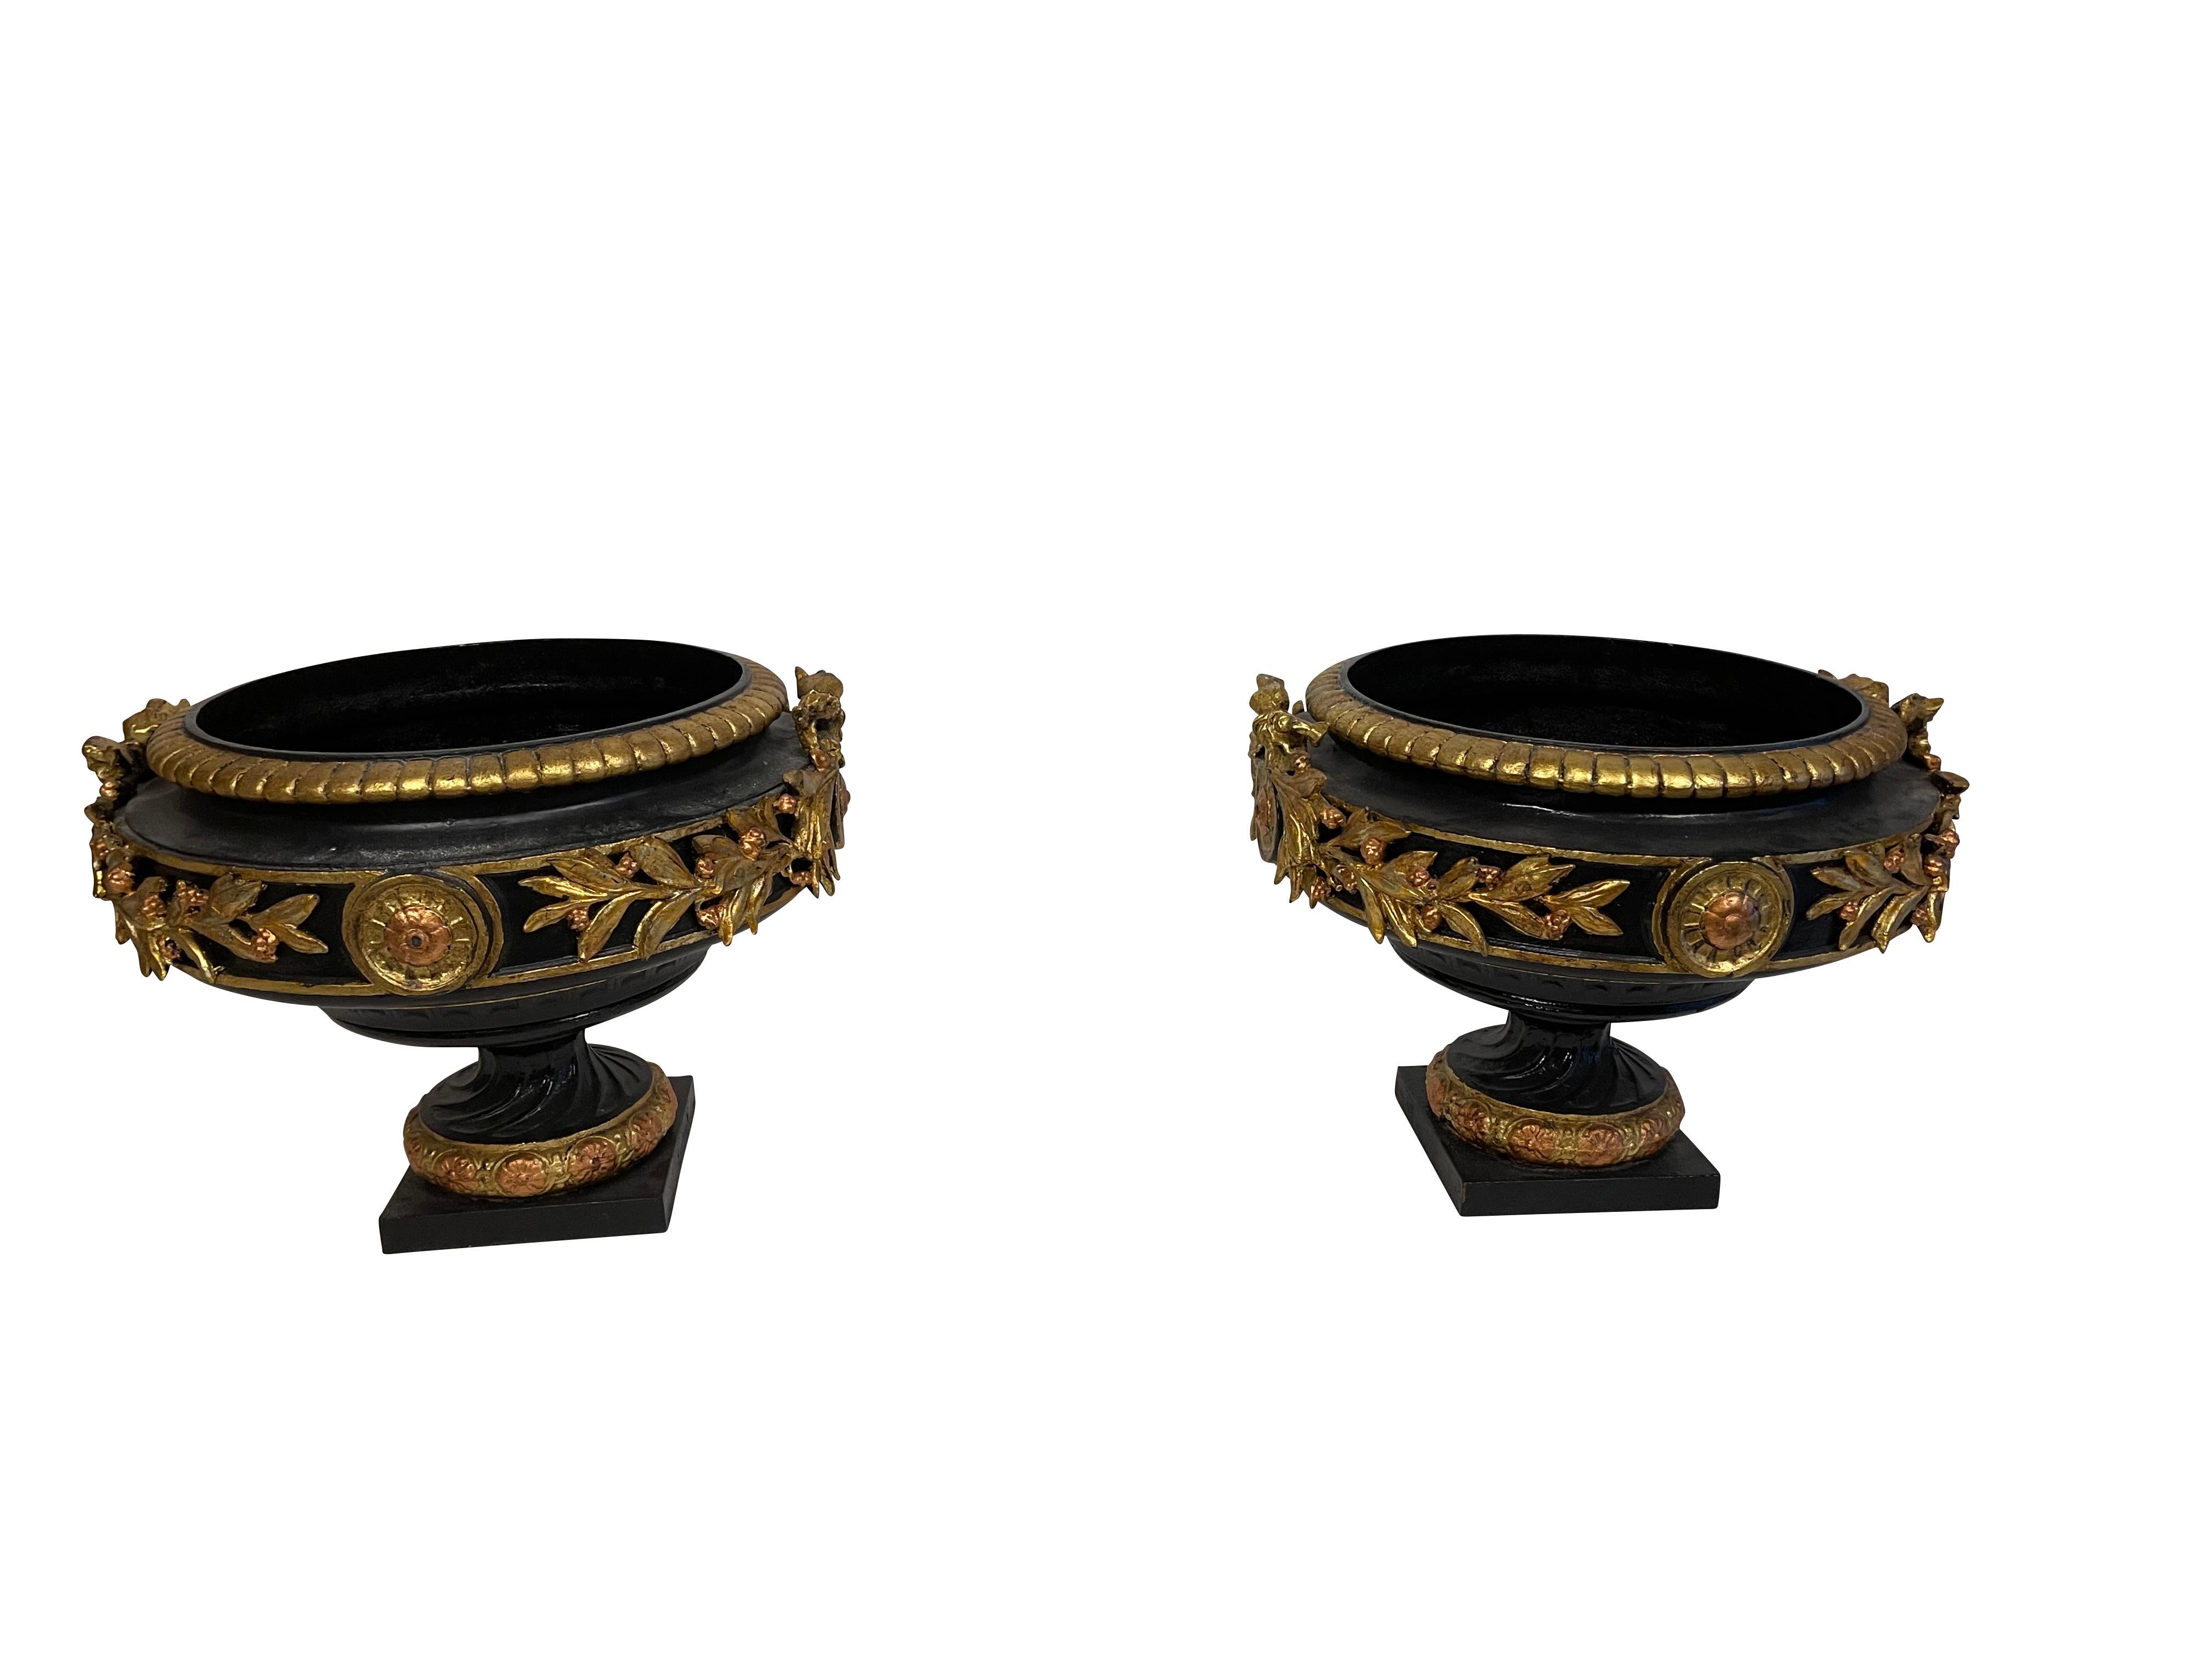 Pair of neoclassical black and gold classical cast iron urns. Spectacular pair with bow, garland and medallion decoration. Perfect to dress up a garden or indoors as planters.